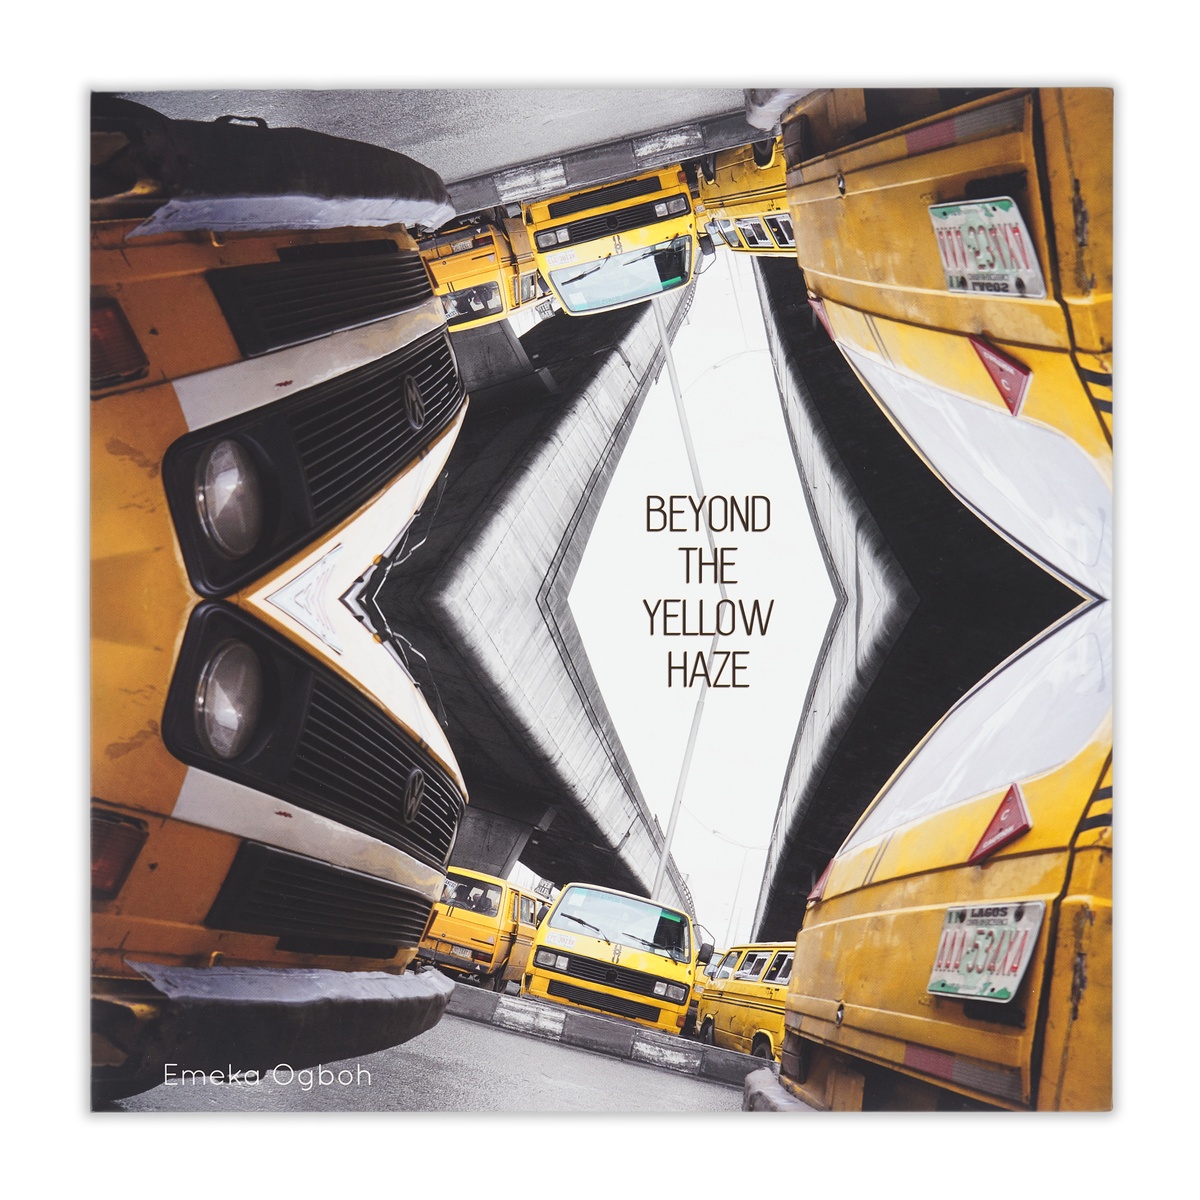 A photograph of the cover of Ememka Ogboh's 12" vinyl record 'Beyond the Yellow Haze'.
